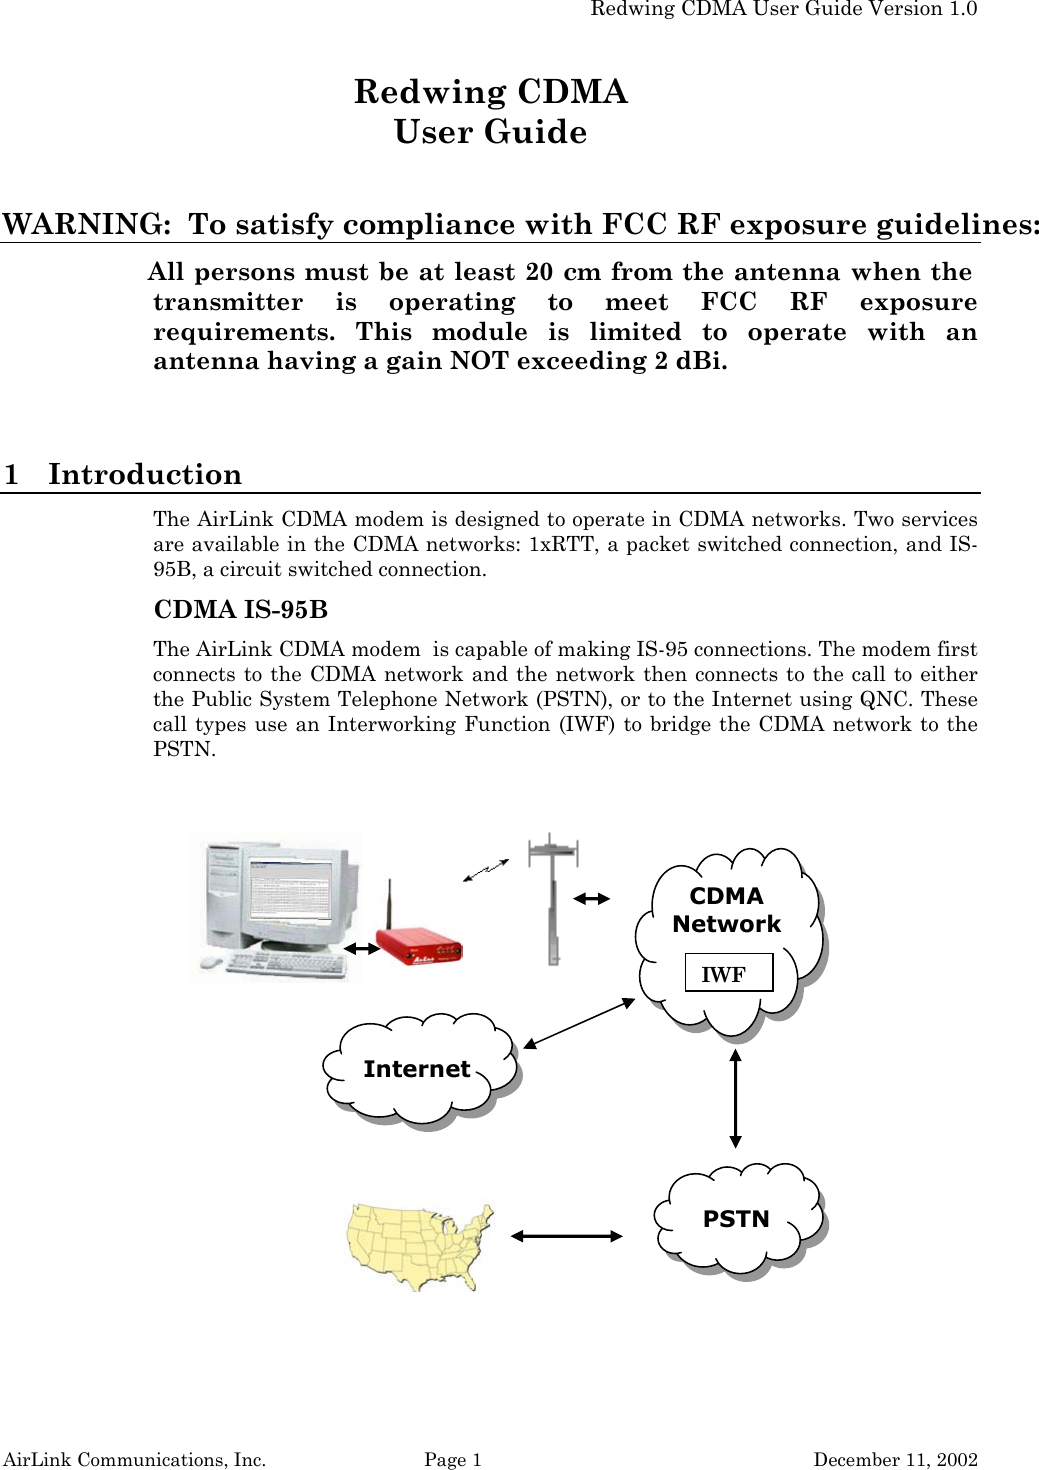   Redwing CDMA User Guide Version 1.0 AirLink Communications, Inc.  Page 1  December 11, 2002 Redwing CDMA User Guide  WARNING:  To satisfy compliance with FCC RF exposure guidelines: All persons must be at least 20 cm from the antenna when the transmitter is operating to meet FCC RF exposure requirements. This module is limited to operate with an antenna having a gain NOT exceeding 2 dBi.  1 Introduction The AirLink CDMA modem is designed to operate in CDMA networks. Two services are available in the CDMA networks: 1xRTT, a packet switched connection, and IS-95B, a circuit switched connection. CDMA IS-95B The AirLink CDMA modem  is capable of making IS-95 connections. The modem first connects to the CDMA network and the network then connects to the call to either the Public System Telephone Network (PSTN), or to the Internet using QNC. These call types use an Interworking Function (IWF) to bridge the CDMA network to the PSTN.   CDMA Network    IWF PSTN Internet 